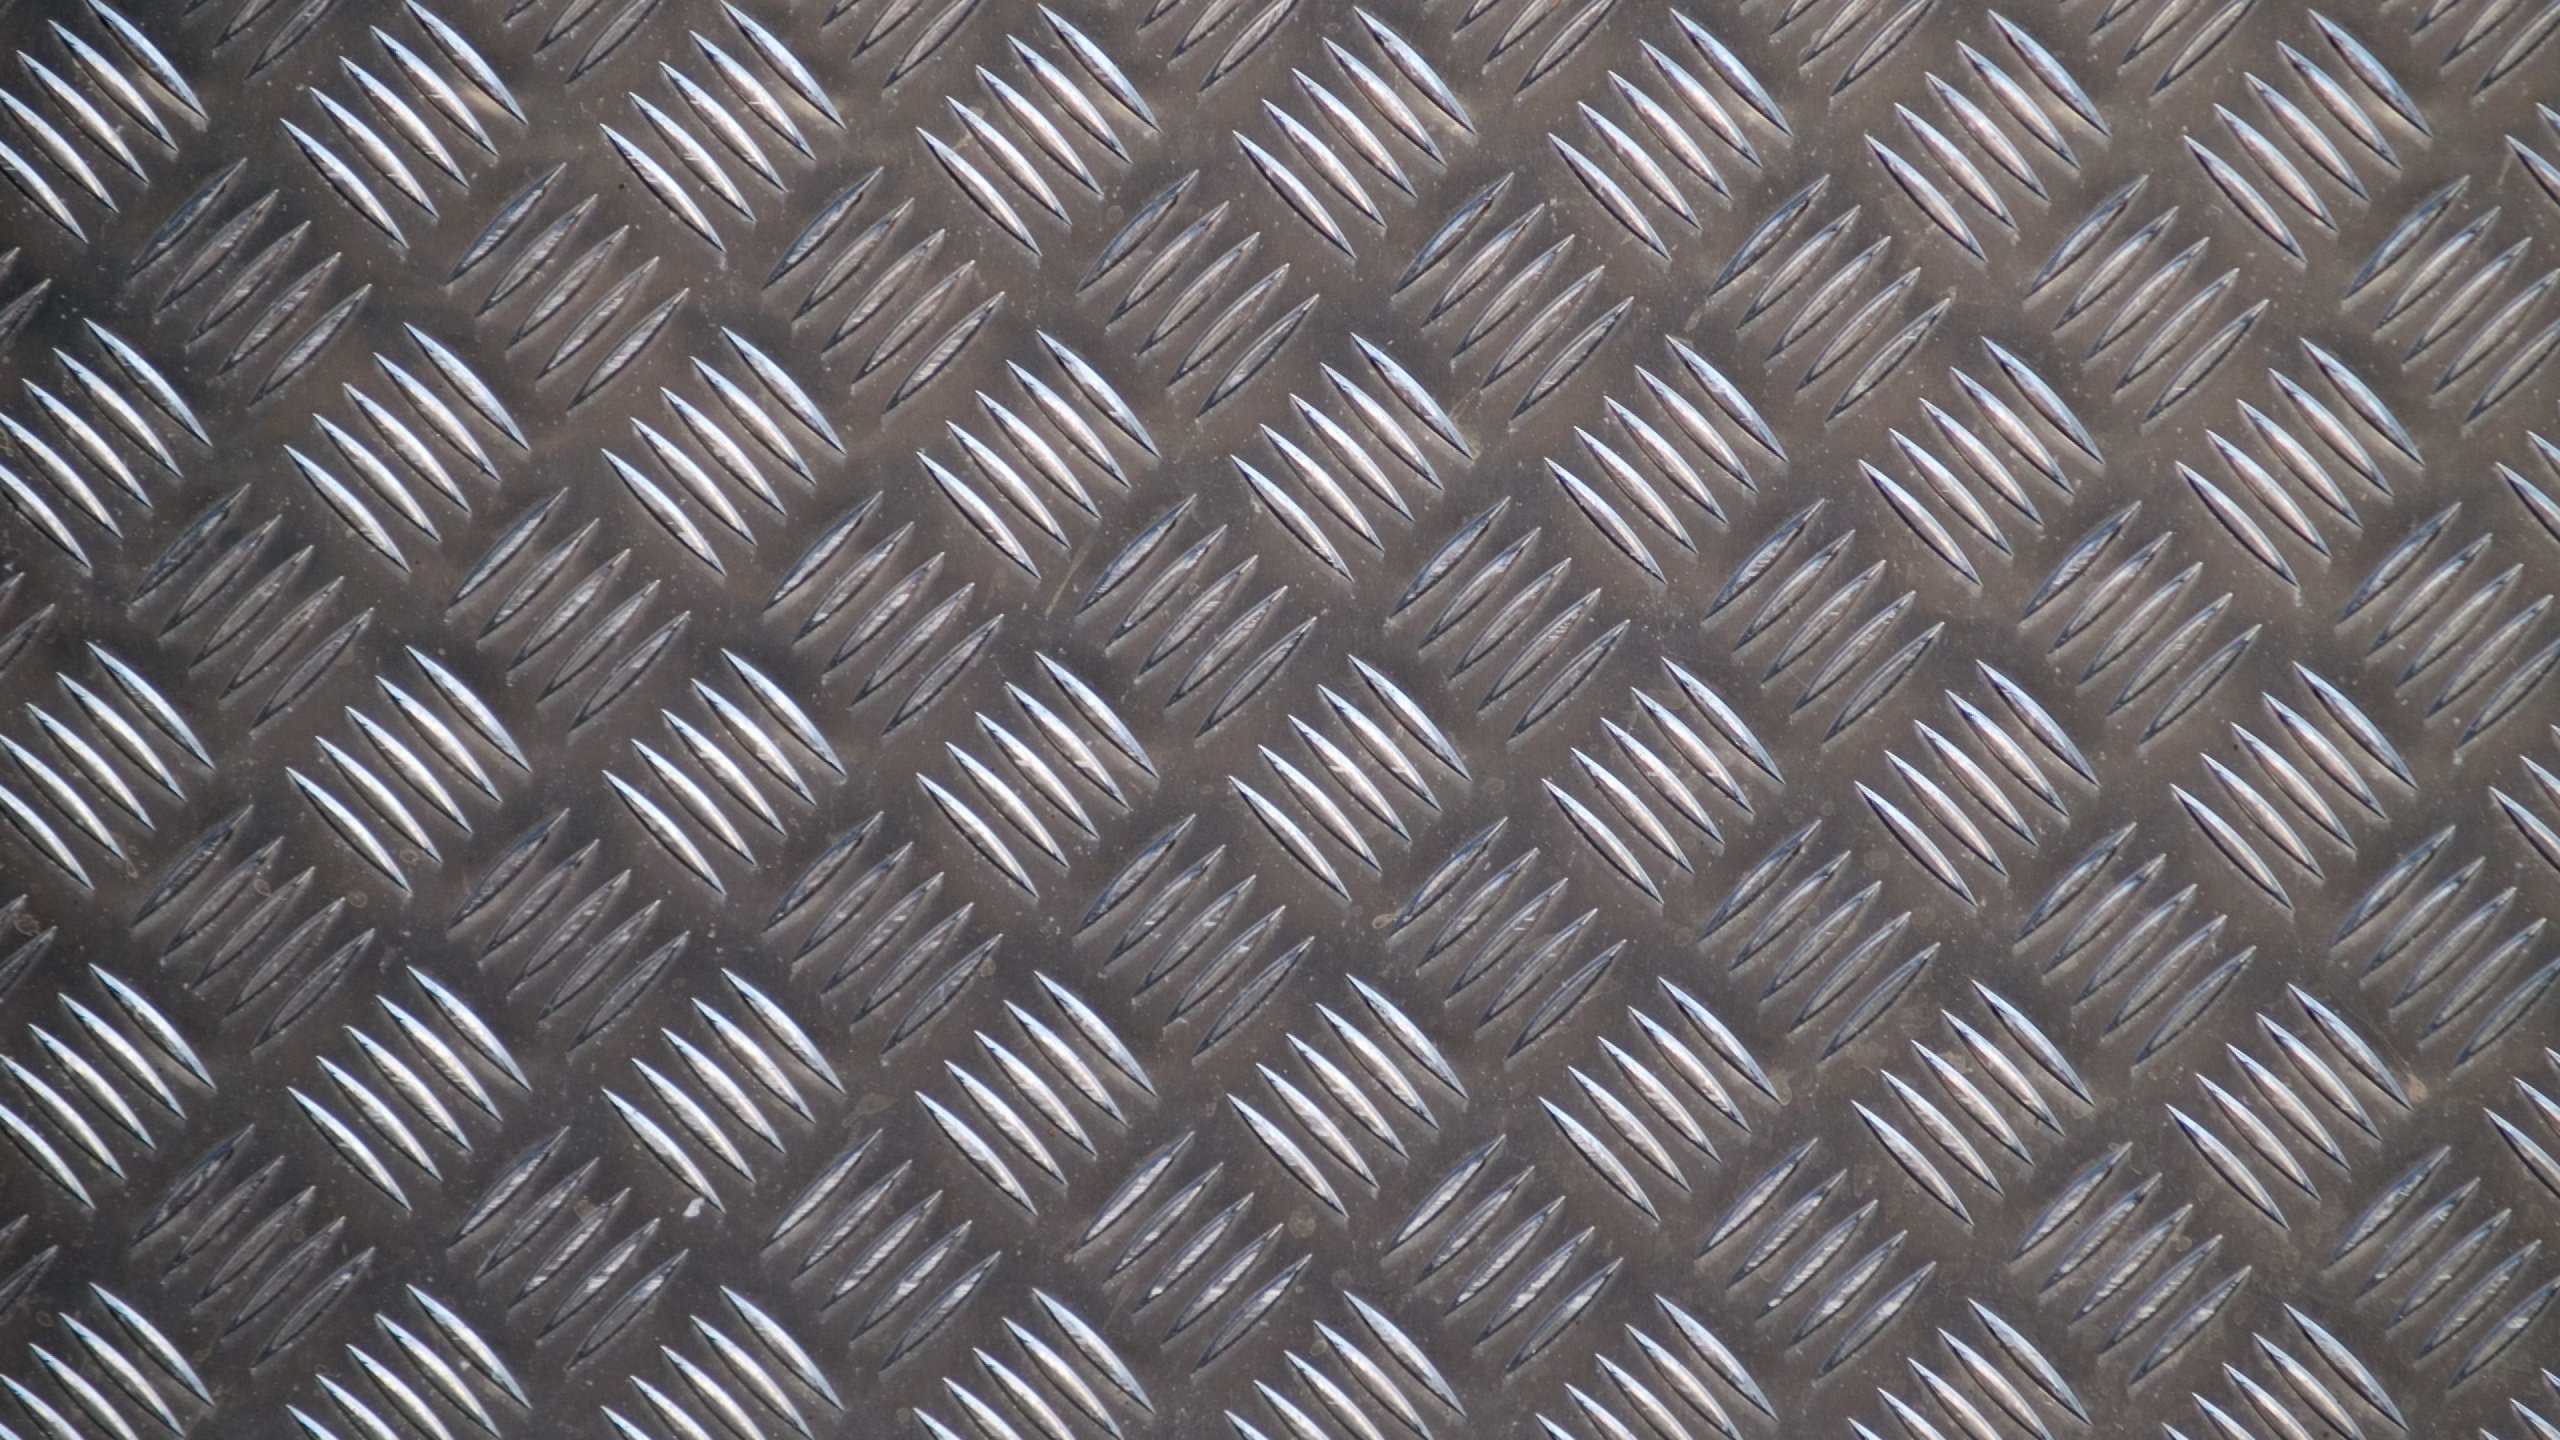 Brown Woven Textile on Brown Wooden Floor. Wallpaper in 2560x1440 Resolution